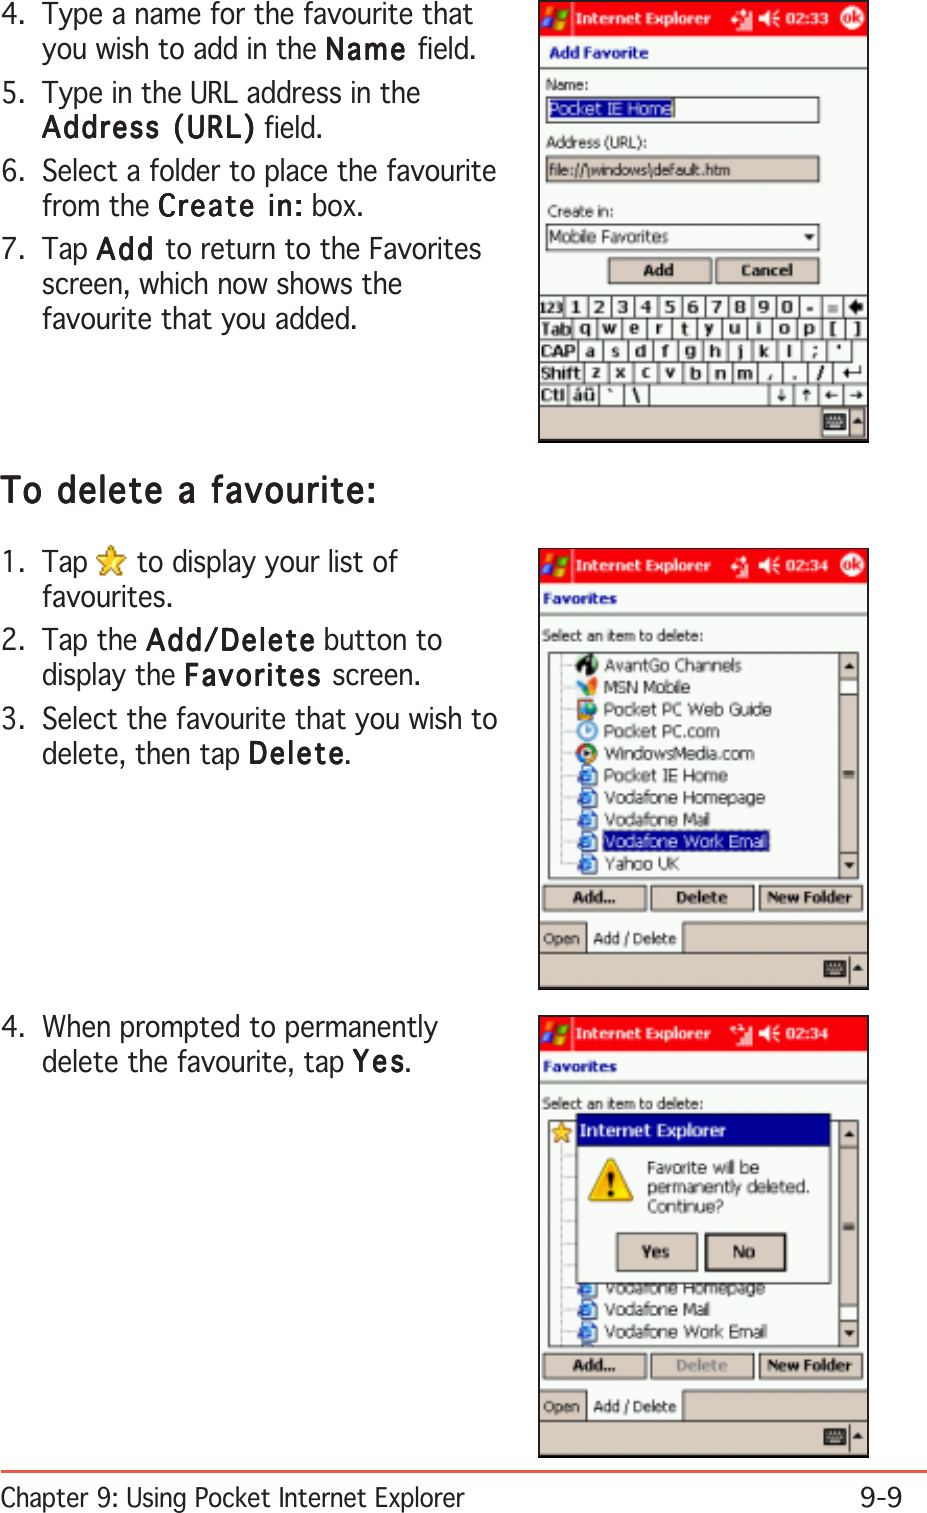 Chapter 9: Using Pocket Internet Explorer9-94. Type a name for the favourite thatyou wish to add in the NameNameNameNameName field.5. Type in the URL address in theAddress (URL)Address (URL)Address (URL)Address (URL)Address (URL) field.6. Select a folder to place the favouritefrom the Create in:Create in:Create in:Create in:Create in: box.7. Tap AddAddAddAddAdd to return to the Favoritesscreen, which now shows thefavourite that you added.To delete a favourite:To delete a favourite:To delete a favourite:To delete a favourite:To delete a favourite:1. Tap   to display your list offavourites.2. Tap the Add/DeleteAdd/DeleteAdd/DeleteAdd/DeleteAdd/Delete button todisplay the FavoritesFavoritesFavoritesFavoritesFavorites screen.3. Select the favourite that you wish todelete, then tap DeleteDeleteDeleteDeleteDelete.4. When prompted to permanentlydelete the favourite, tap YesYesYesYesYes.